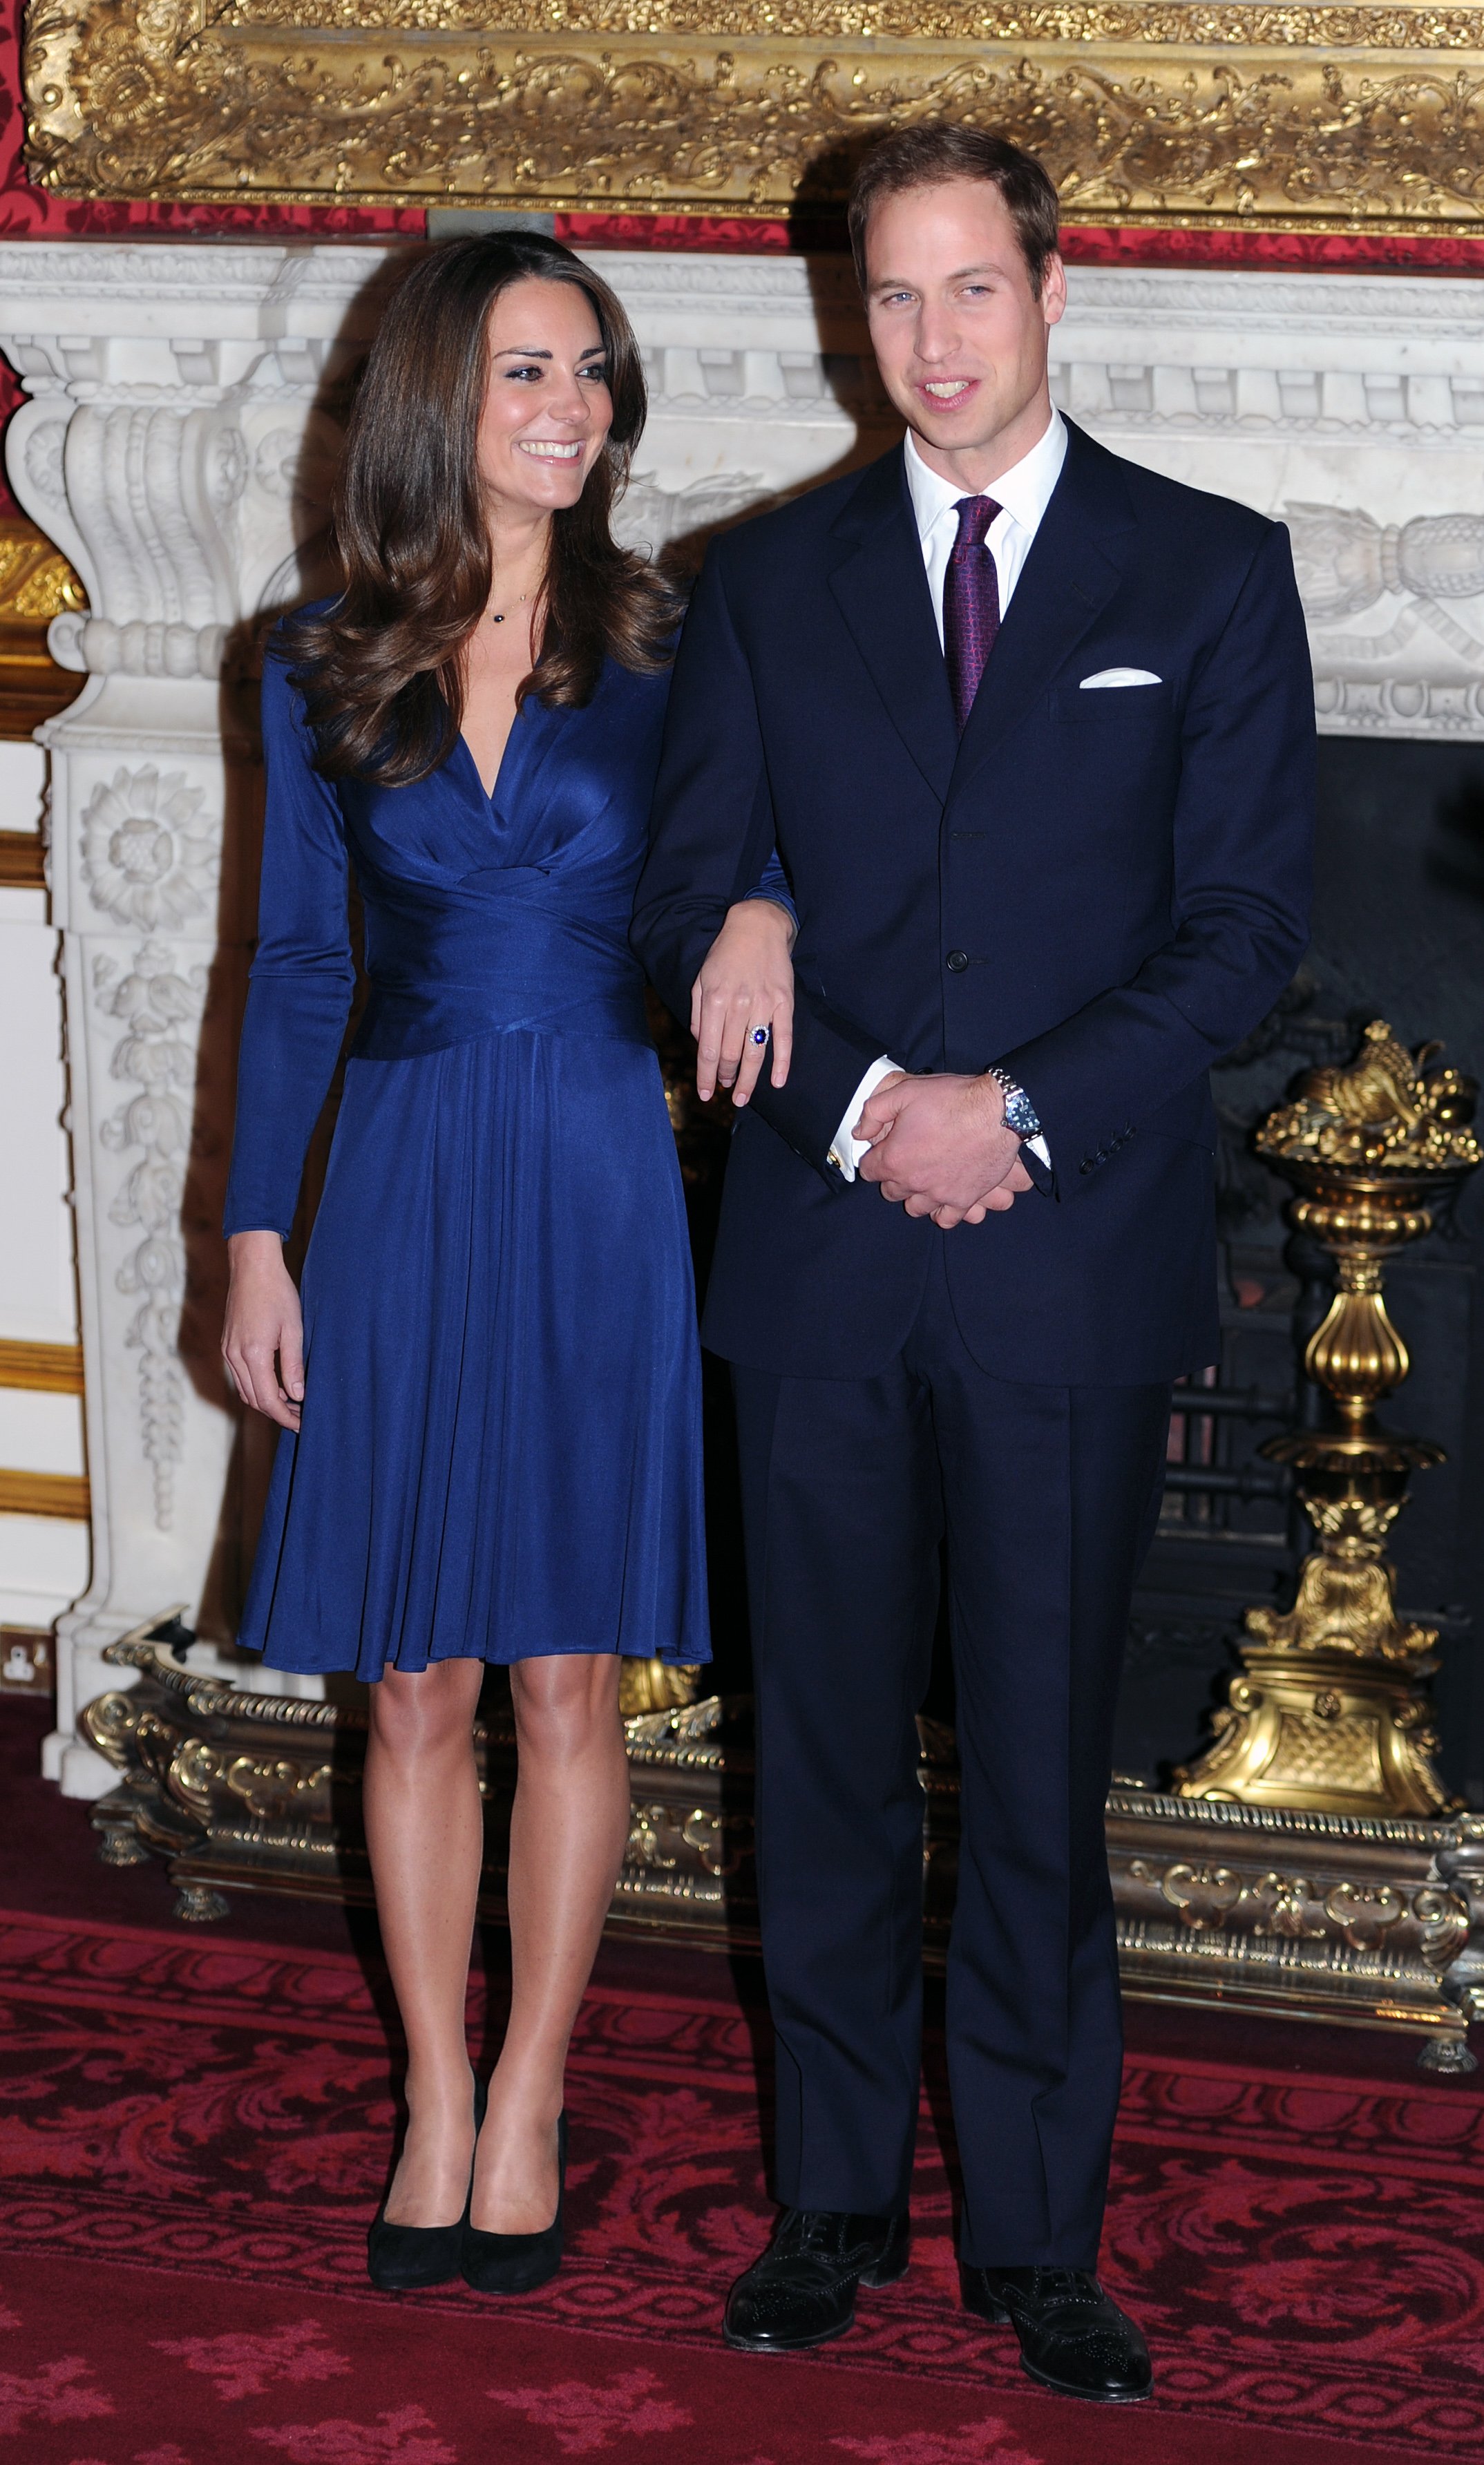 Prince William and Kate Middleton posing for photographs in the State Apartments of St James Palace as they announce their engagement on November 16, 2010 in London, England. / Source: Getty Images